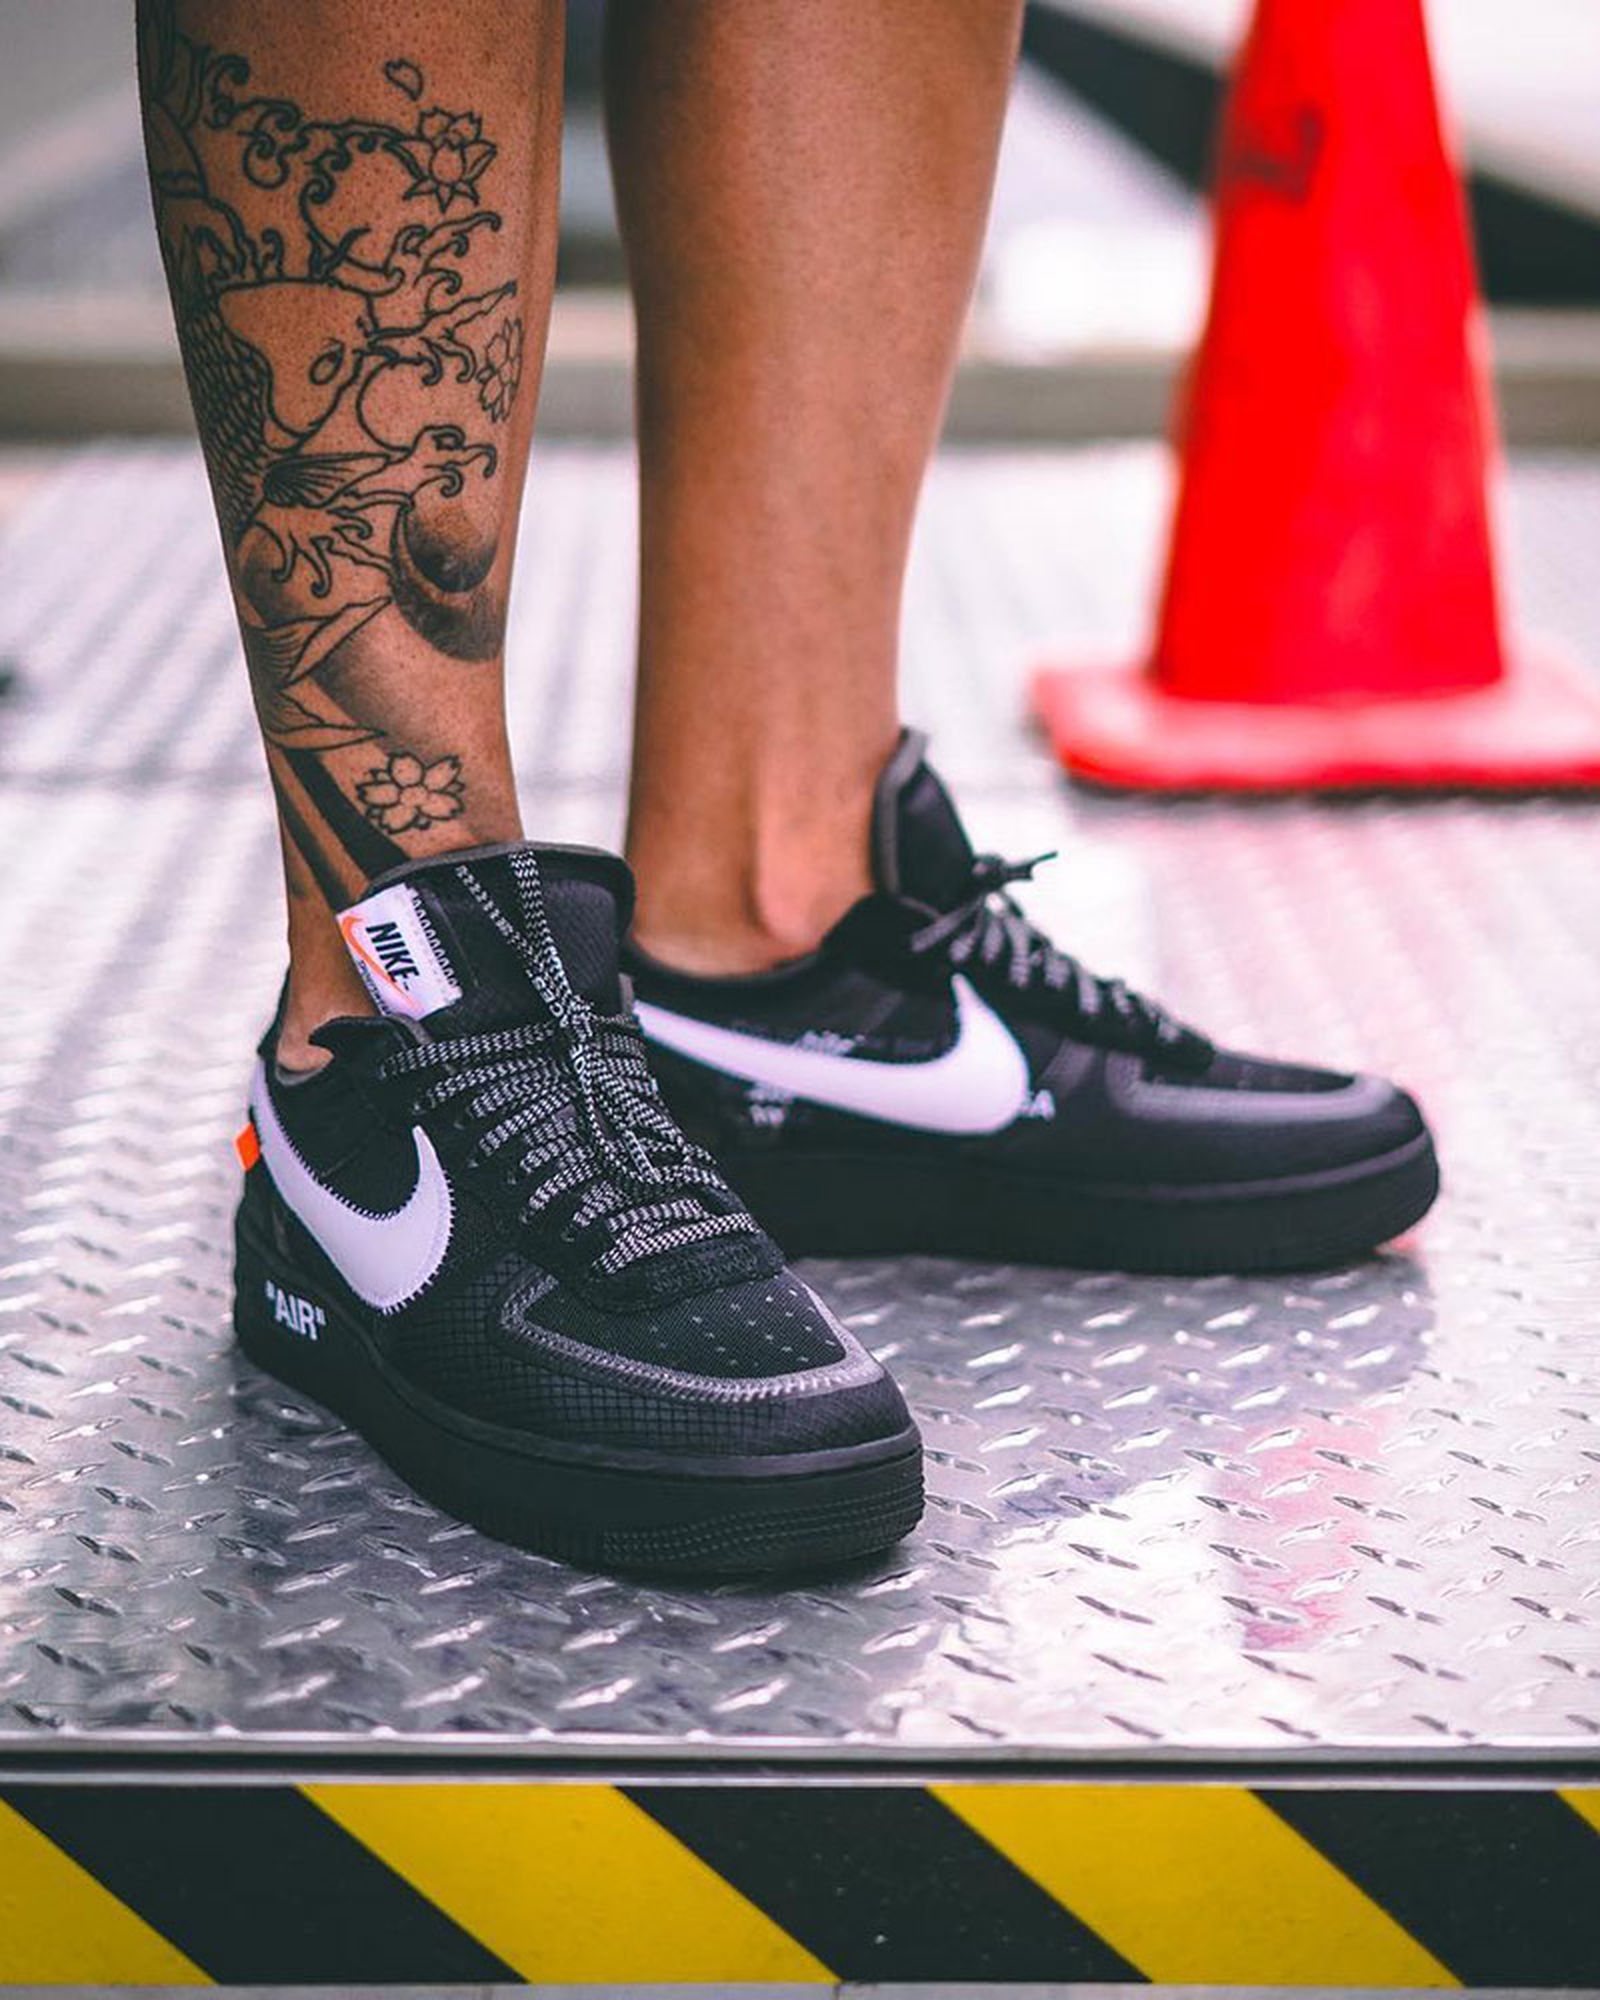 Senator Er Pearly OFF-WHITE x Nike Air Force 1 “Black”: On-Foot Pictures Surfaced